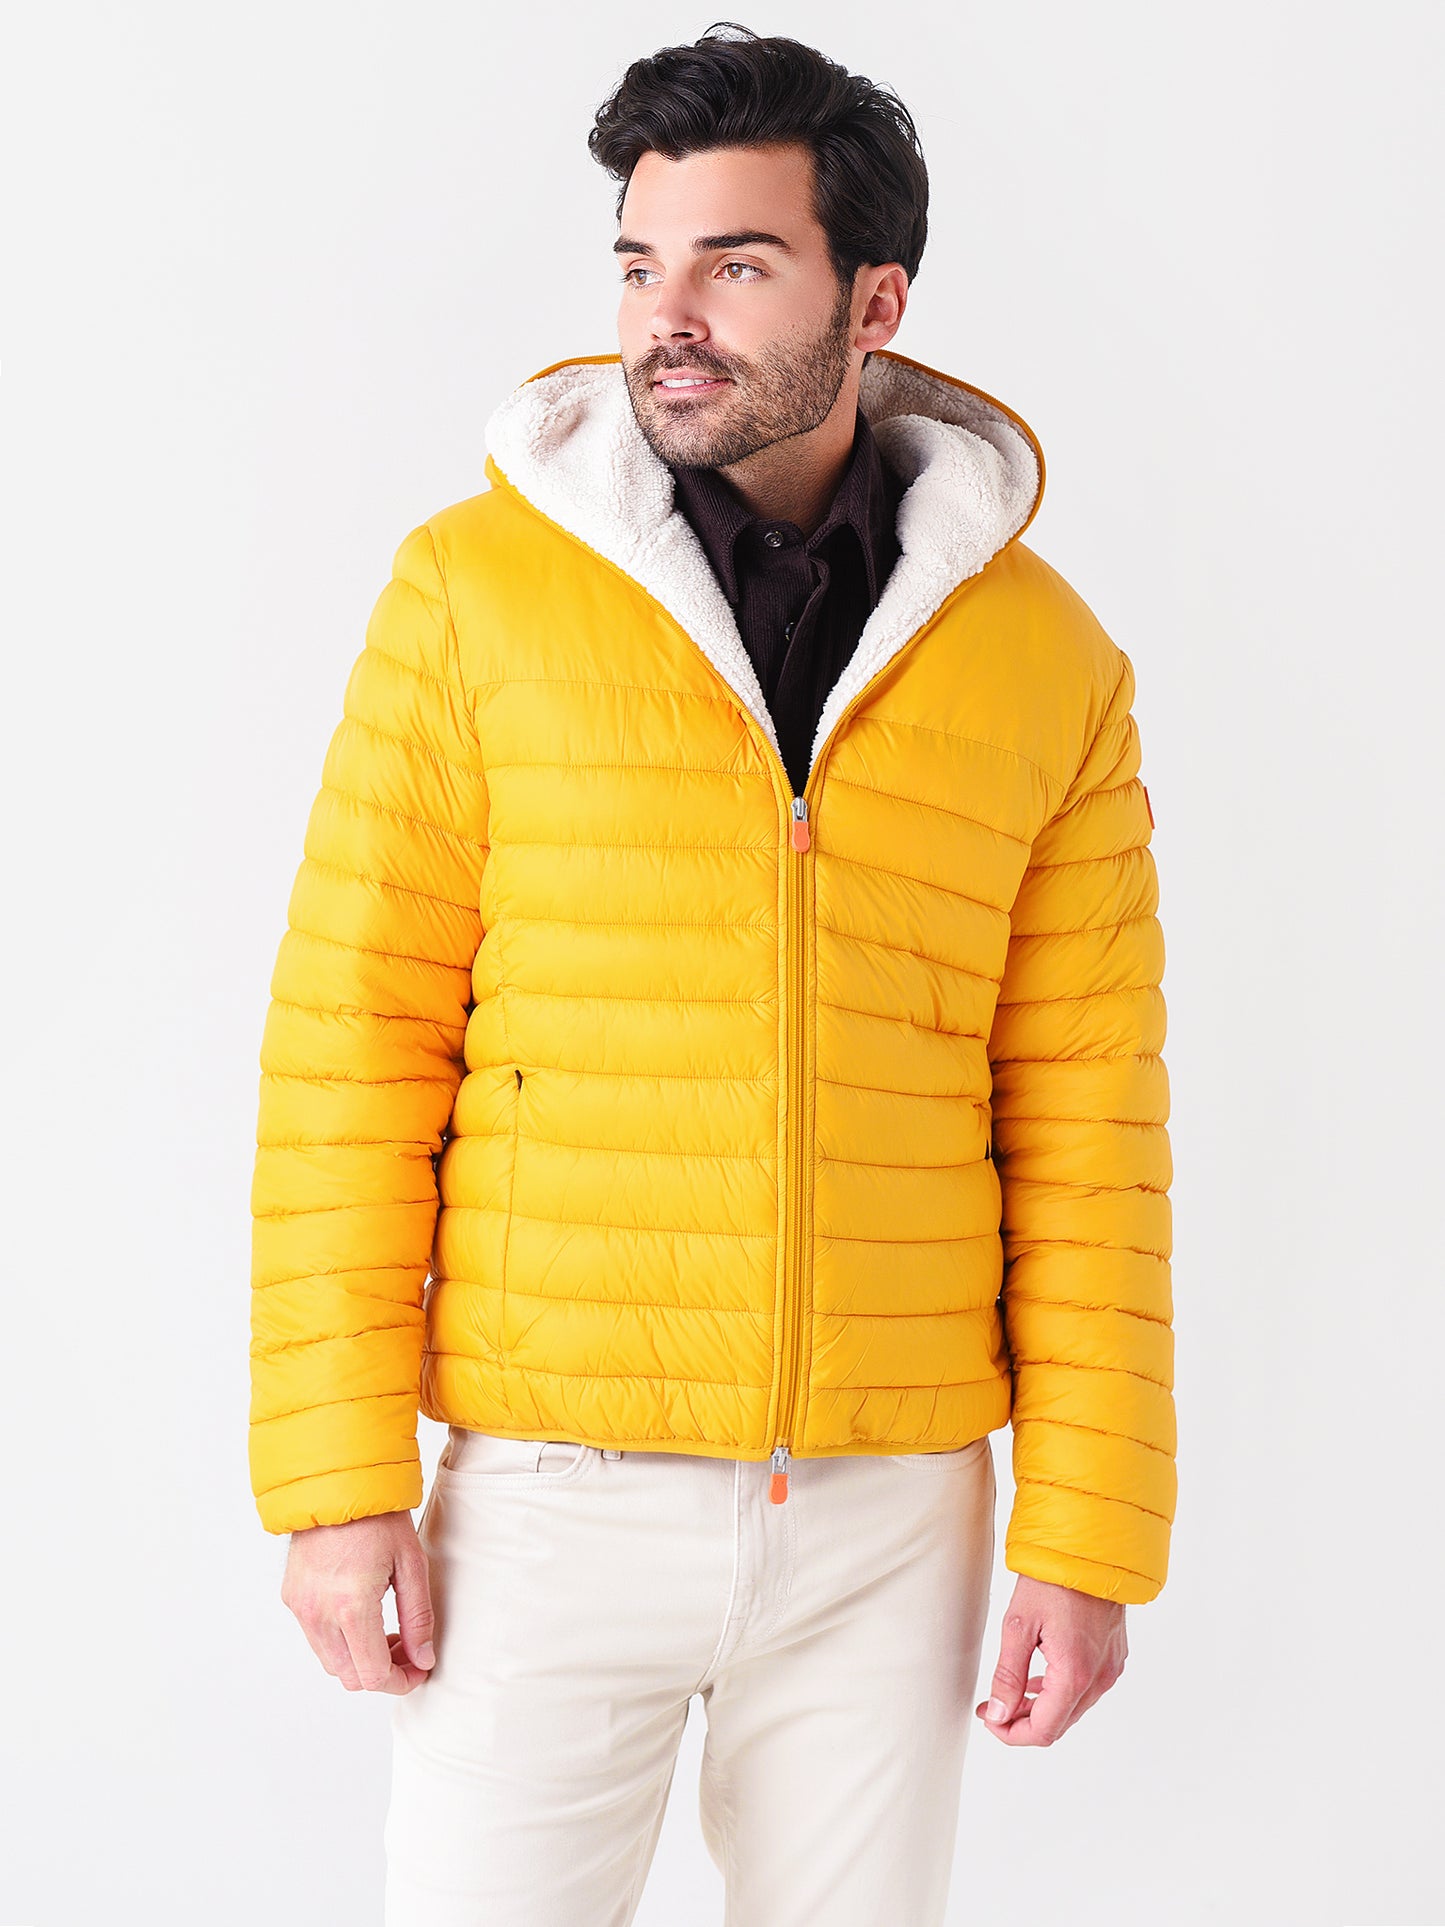 Save the Duck Men's Nathan Jacket